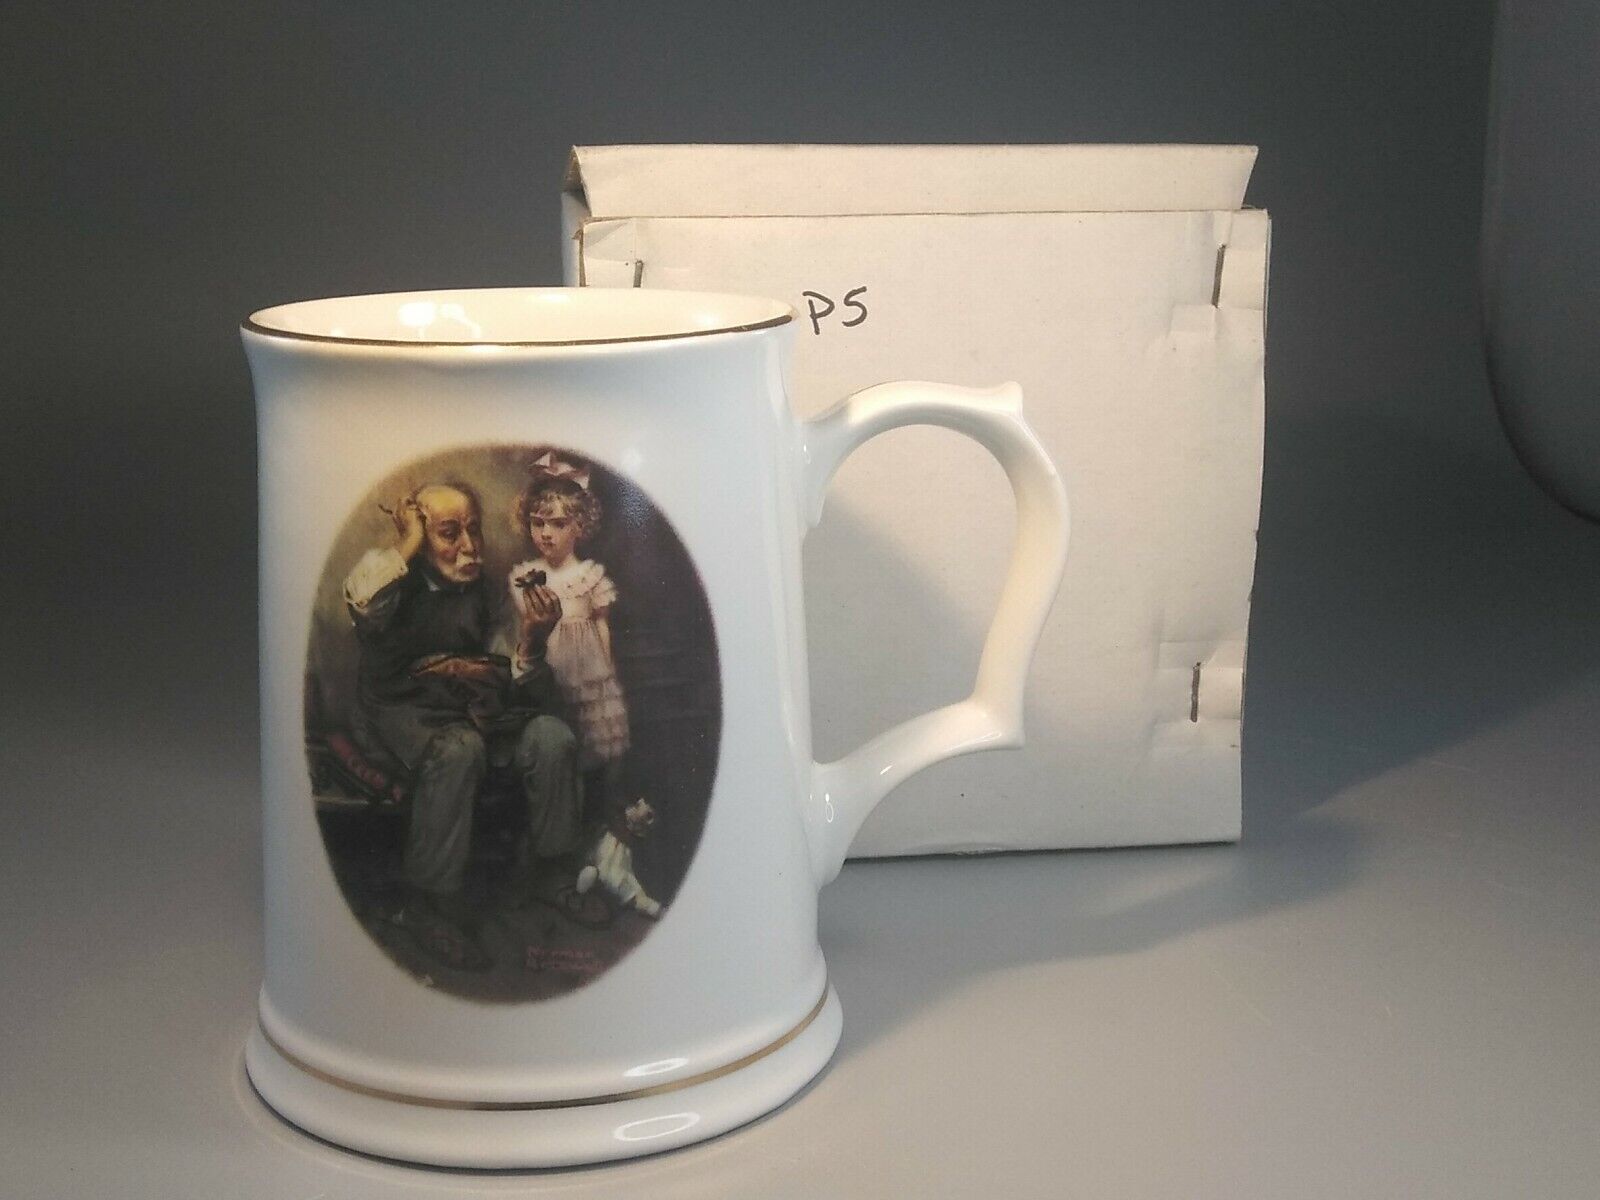 Vintage 1987 Norman Rockwell The Shoemakers Challenge Museum Collection Mug (P5)